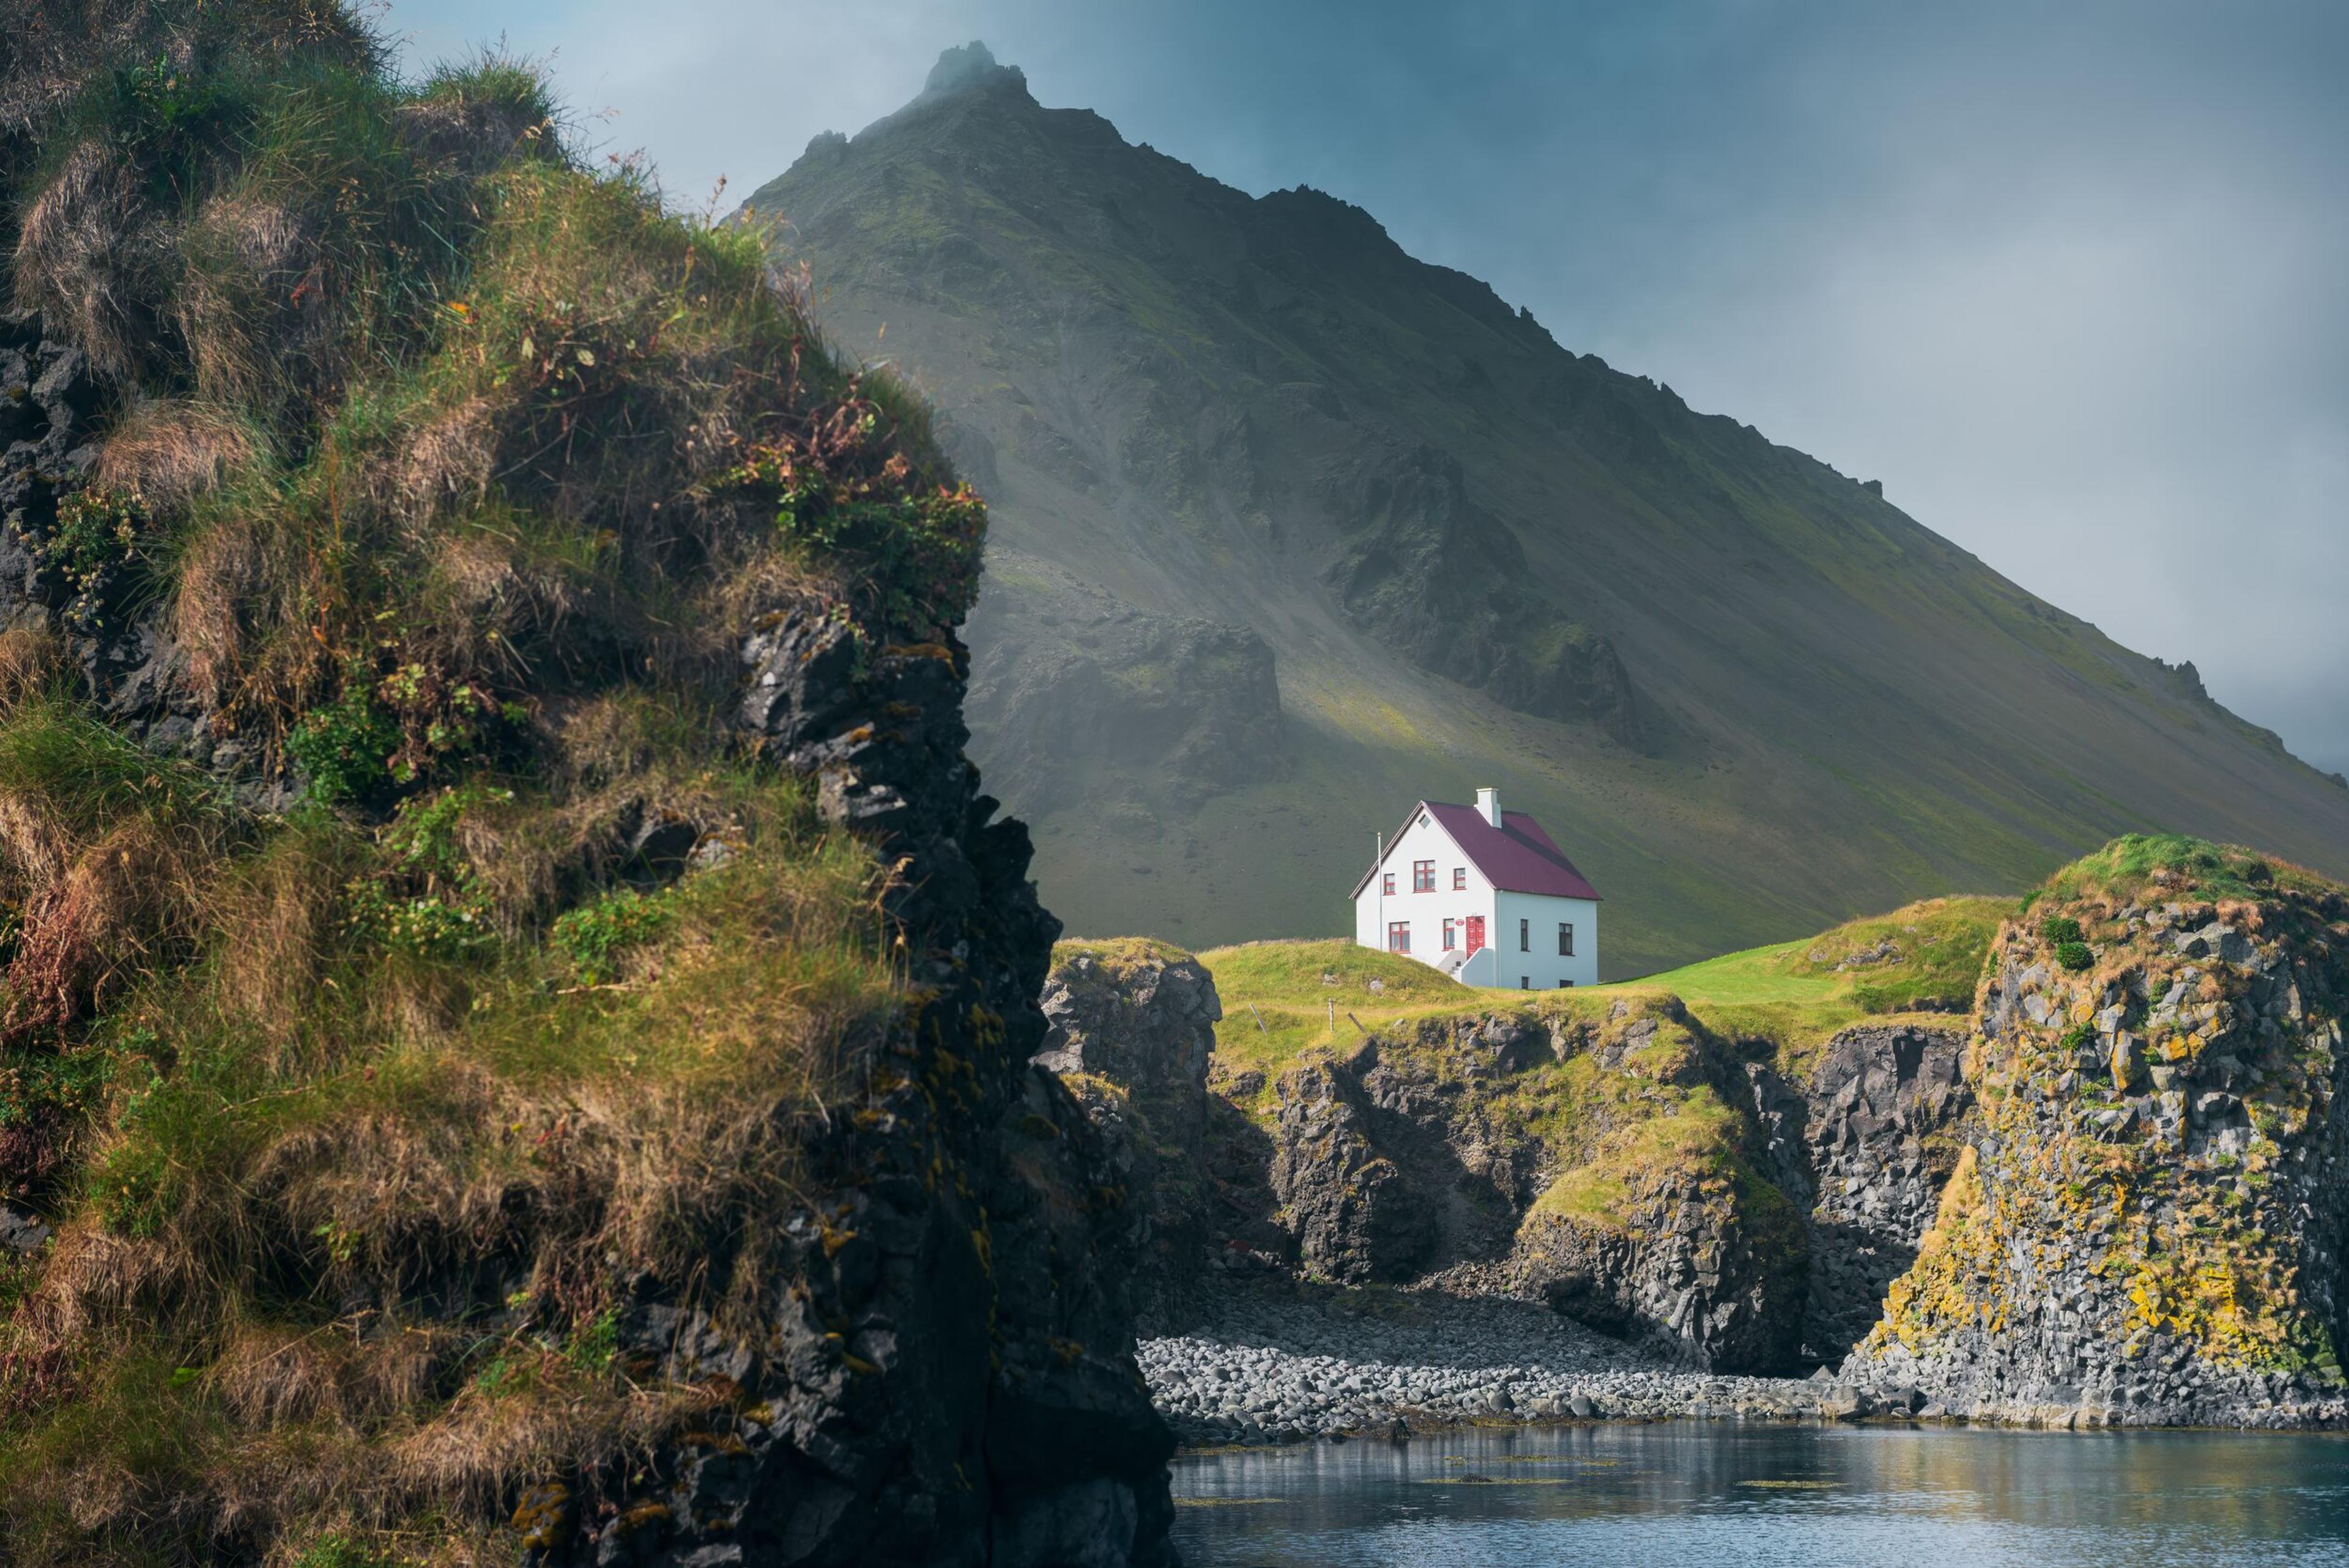 A solitary white house with a red roof stands in stark contrast to its surroundings, nestled among green cliffs and rocky shores near a tranquil body of water, with a towering mountain in the background.